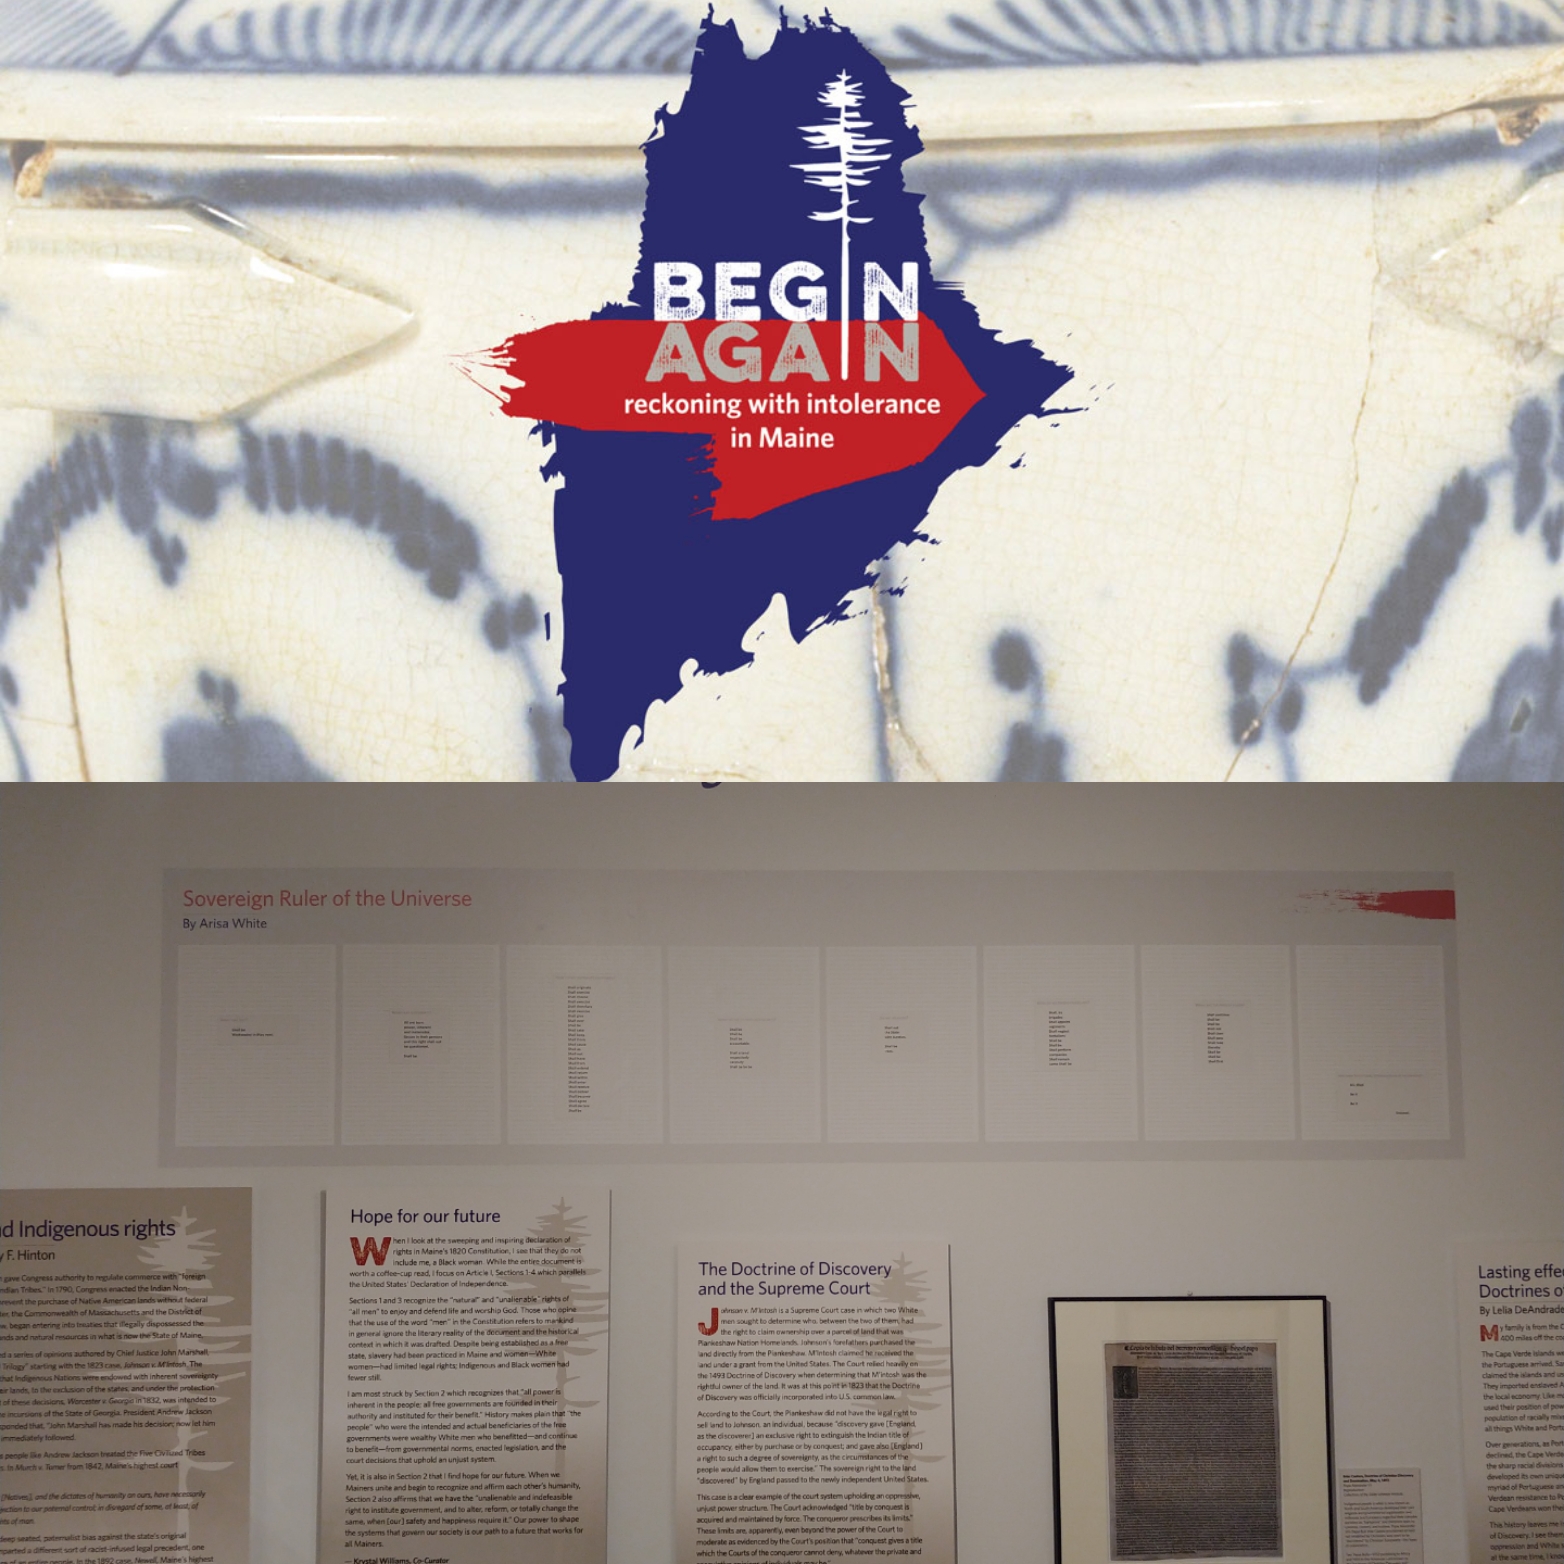 BEGIN AGAIN: reckoning with intolerance in Maine at the Maine Historical Society